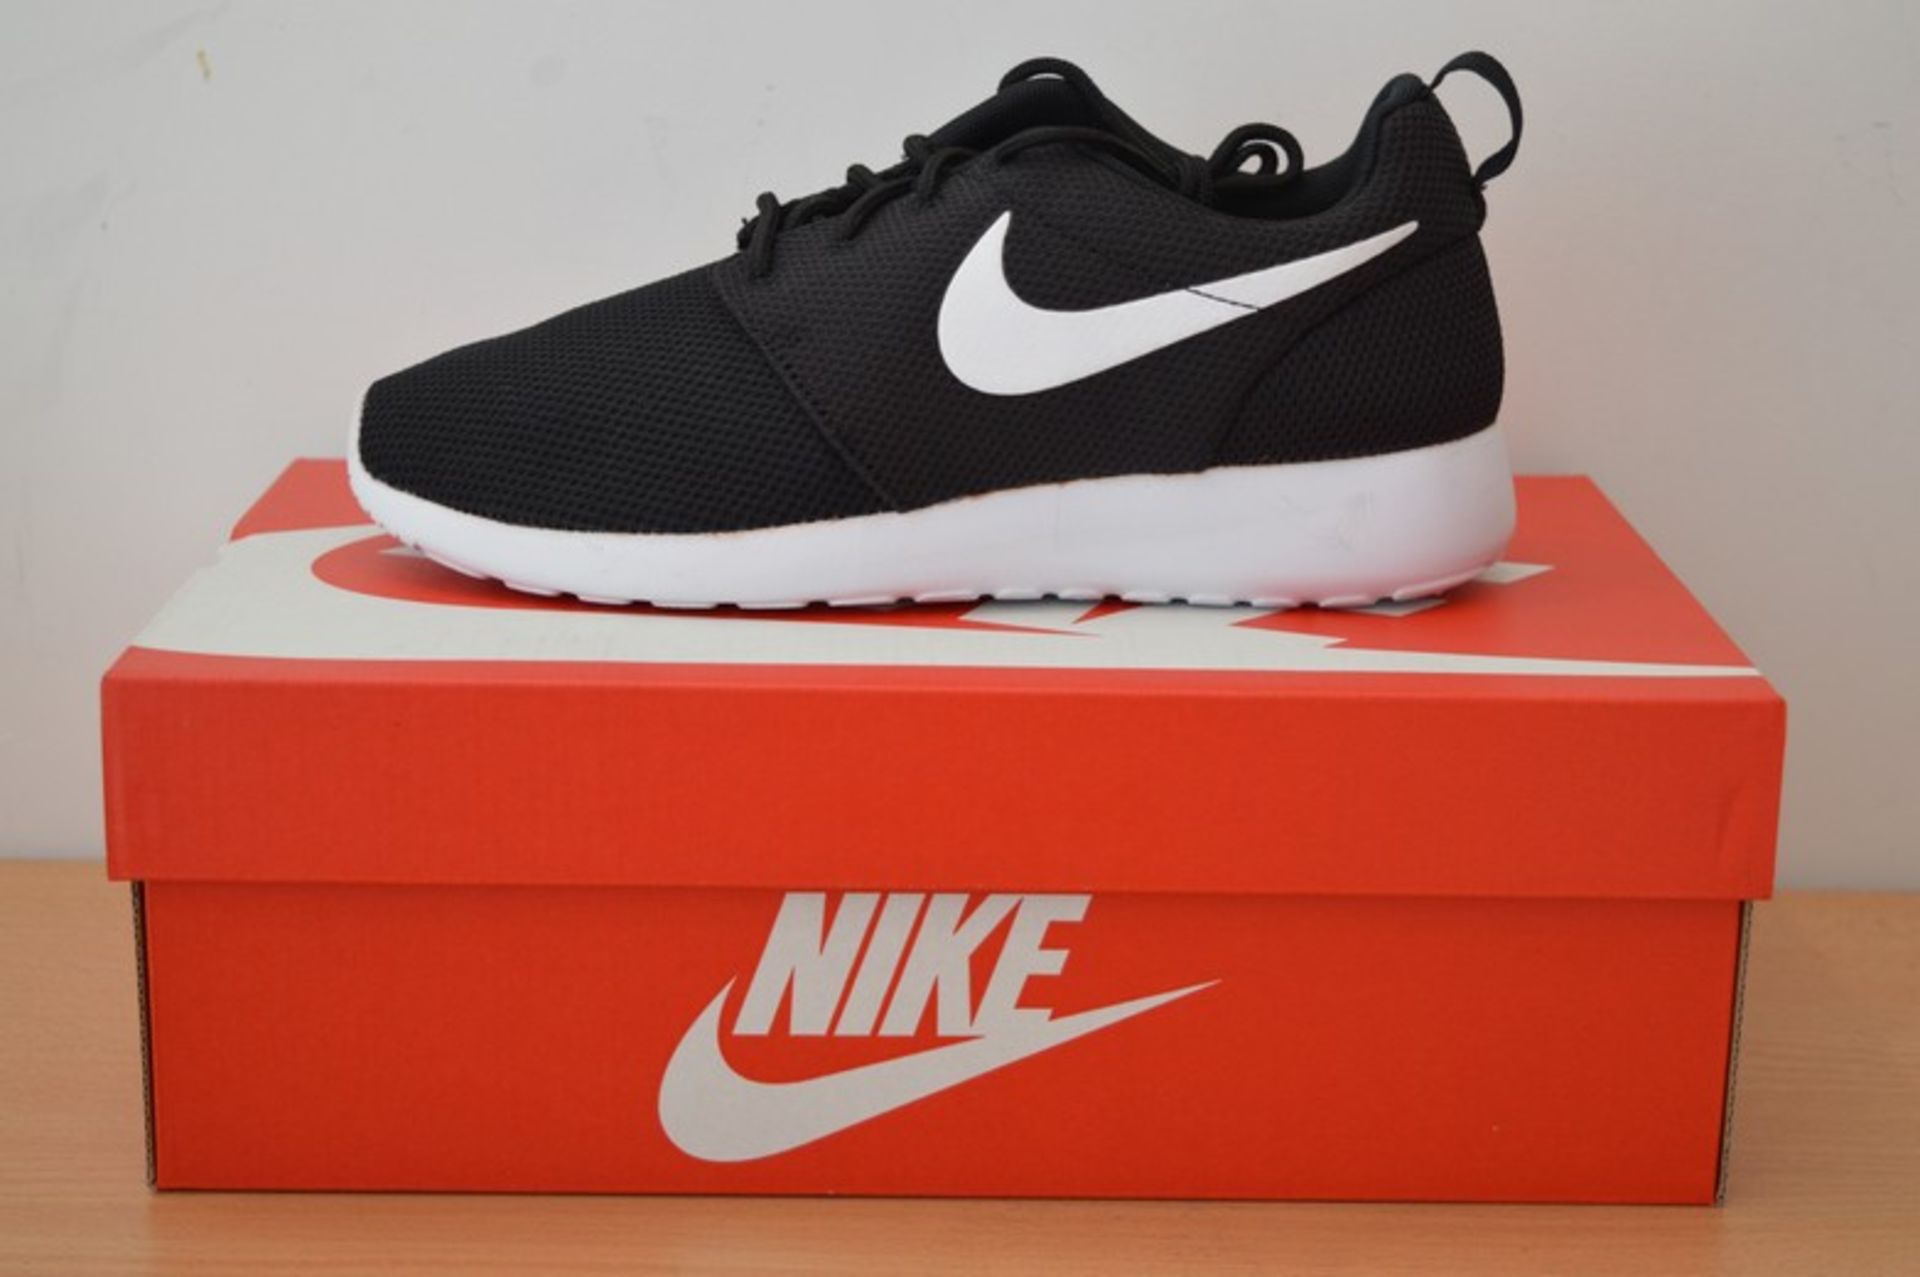 BOXED BRAND NEW NIKE ROSHRUN GENTS BLACK/WHITE TRAINERS IN UK SIZE 5 RRP £55 (DSCLIP)(23.03.15)